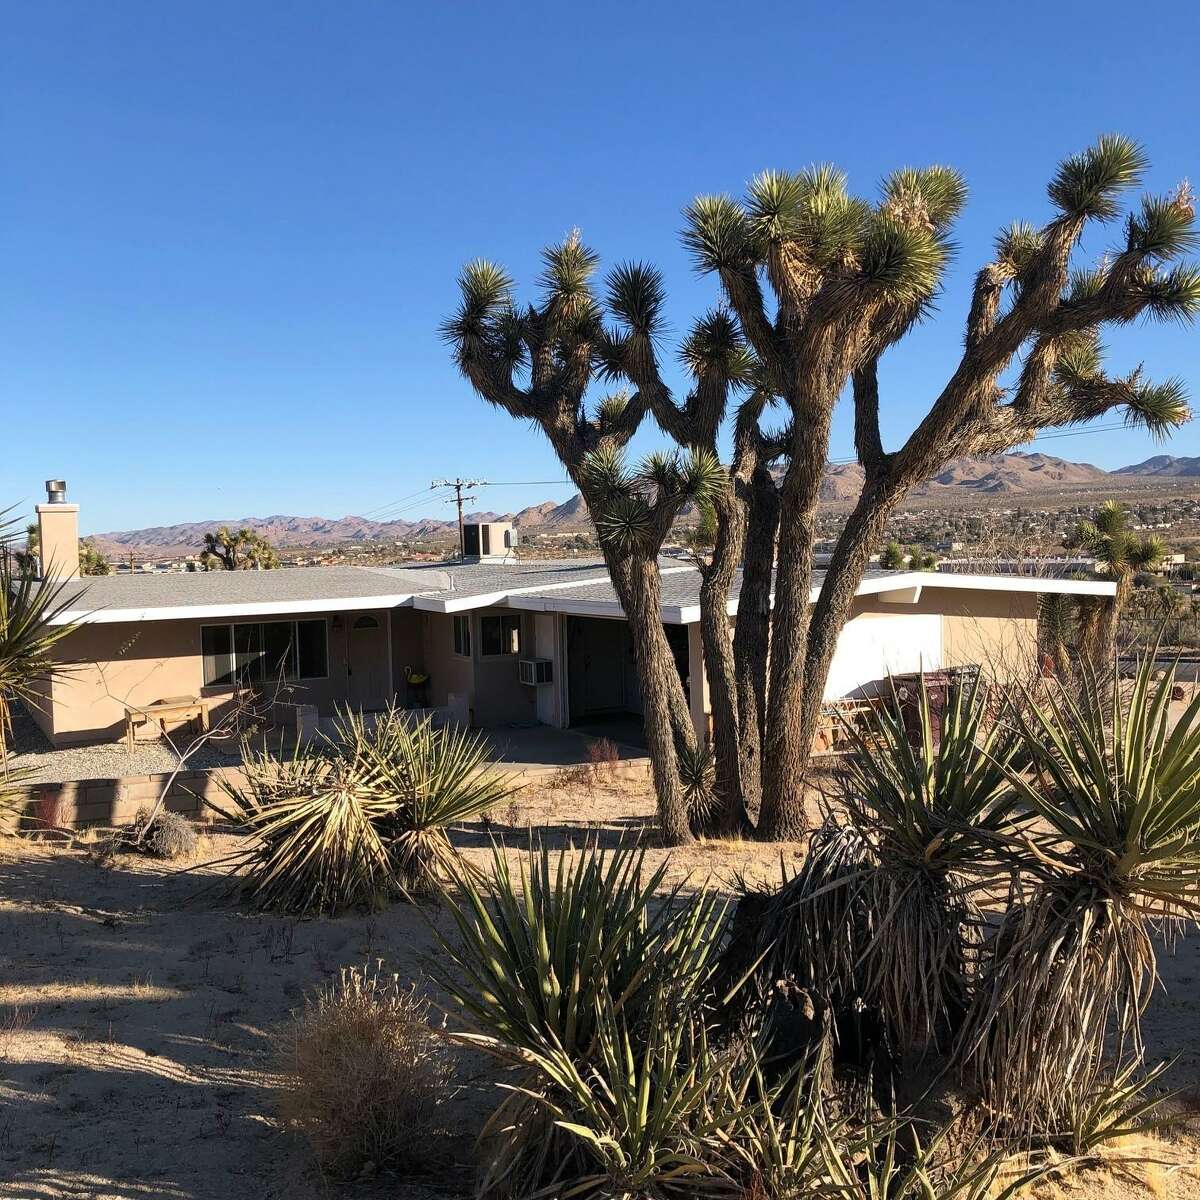 The home of Alexander Aquino-Kaljakin and Che Hurley, who moved with their kids to Yucca Valley in Southern California's High Desert from Los Angeles a year ago.